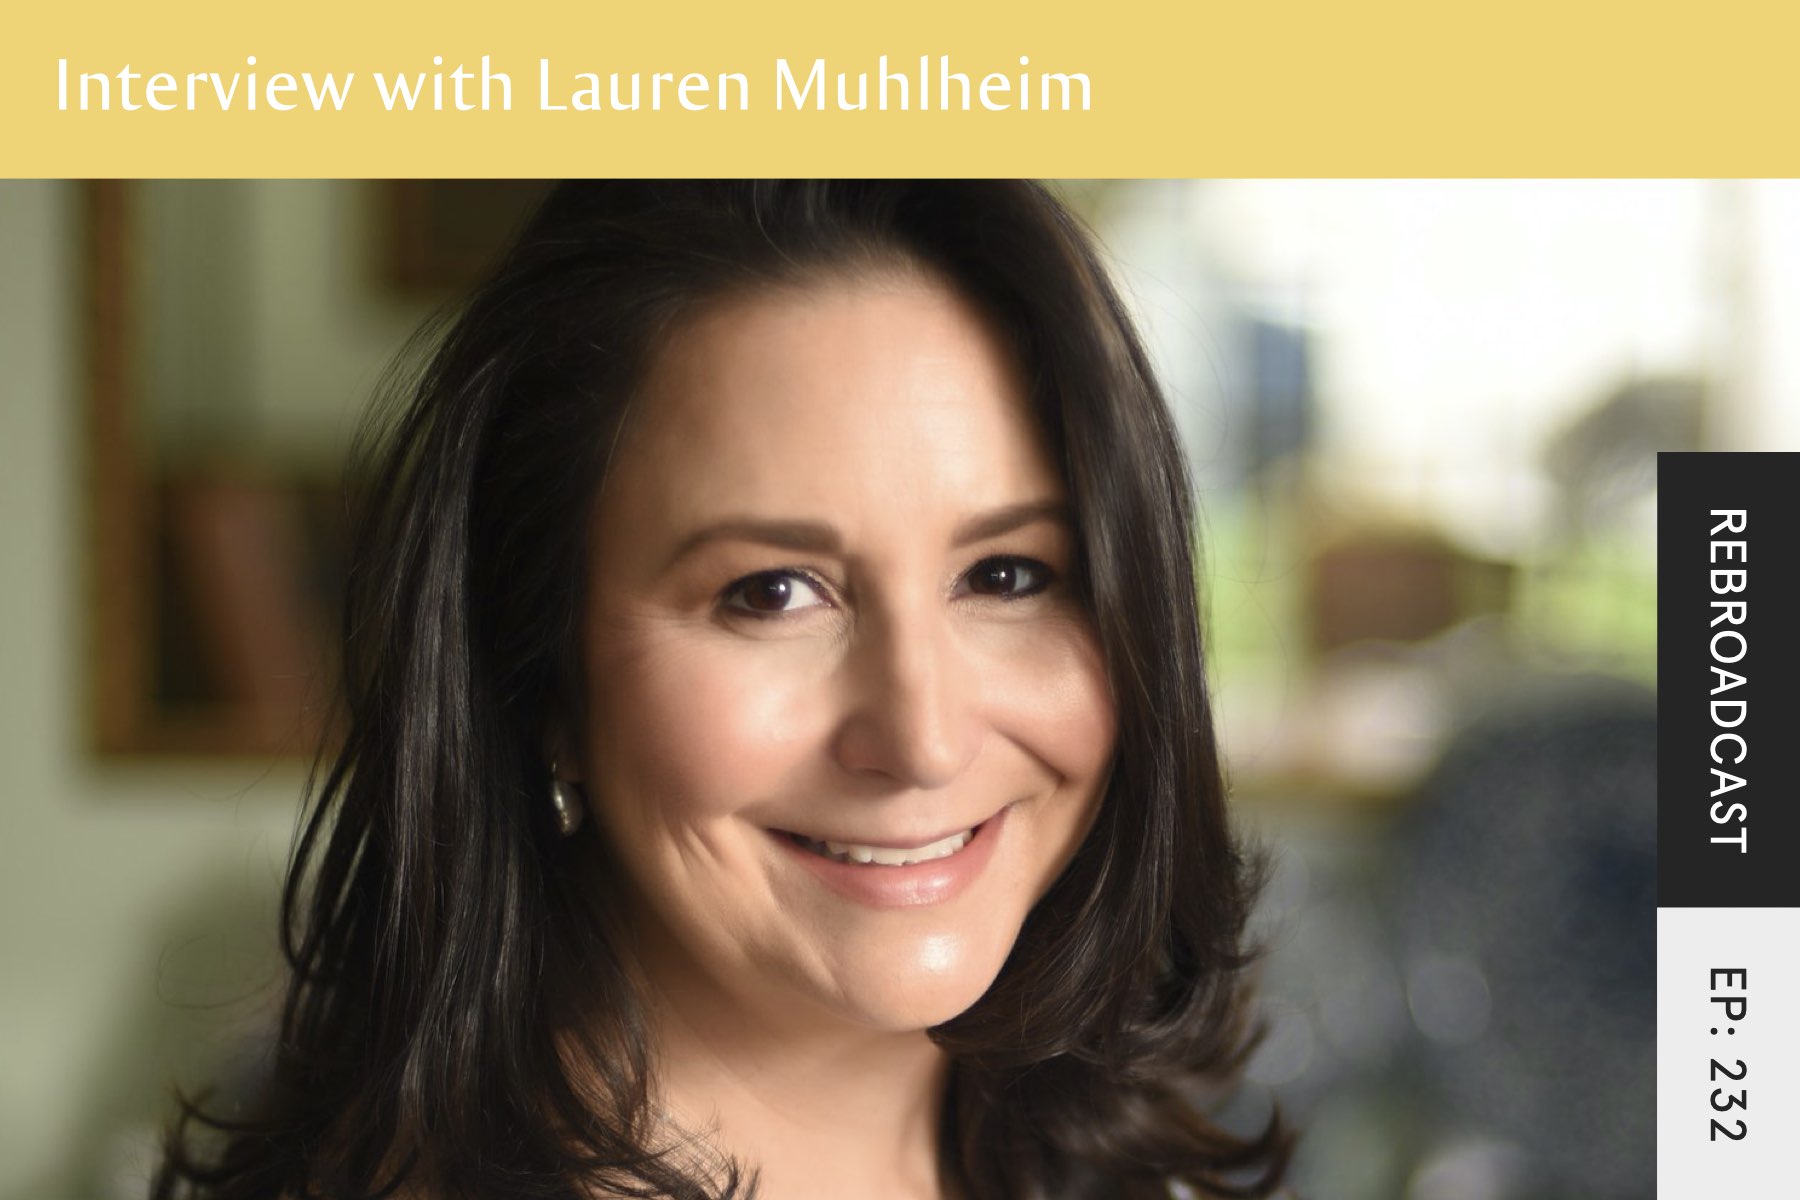 Rebroadcast: Cognitive Behavioural Therapy (CBT) for Eating Disorders and Avoidant Restrictive Food Intake Disorder (ARFID) with Dr. Lauren Muhlheim - Seven Health: Eating Disorder Recovery and Anti Diet Nutritionist